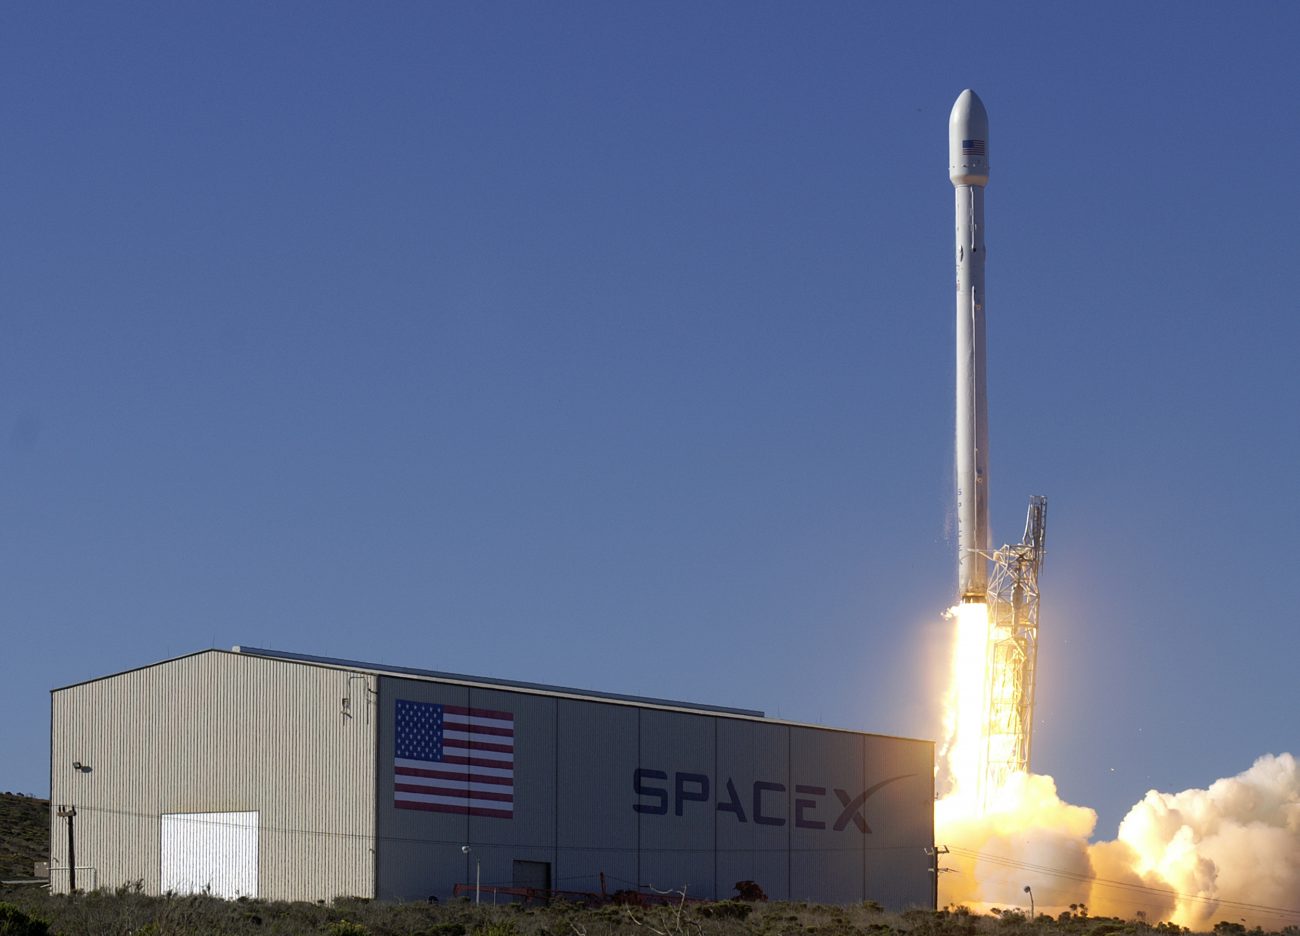 Whether NASA will allow SpaceX to fly to ISS on a used missiles?